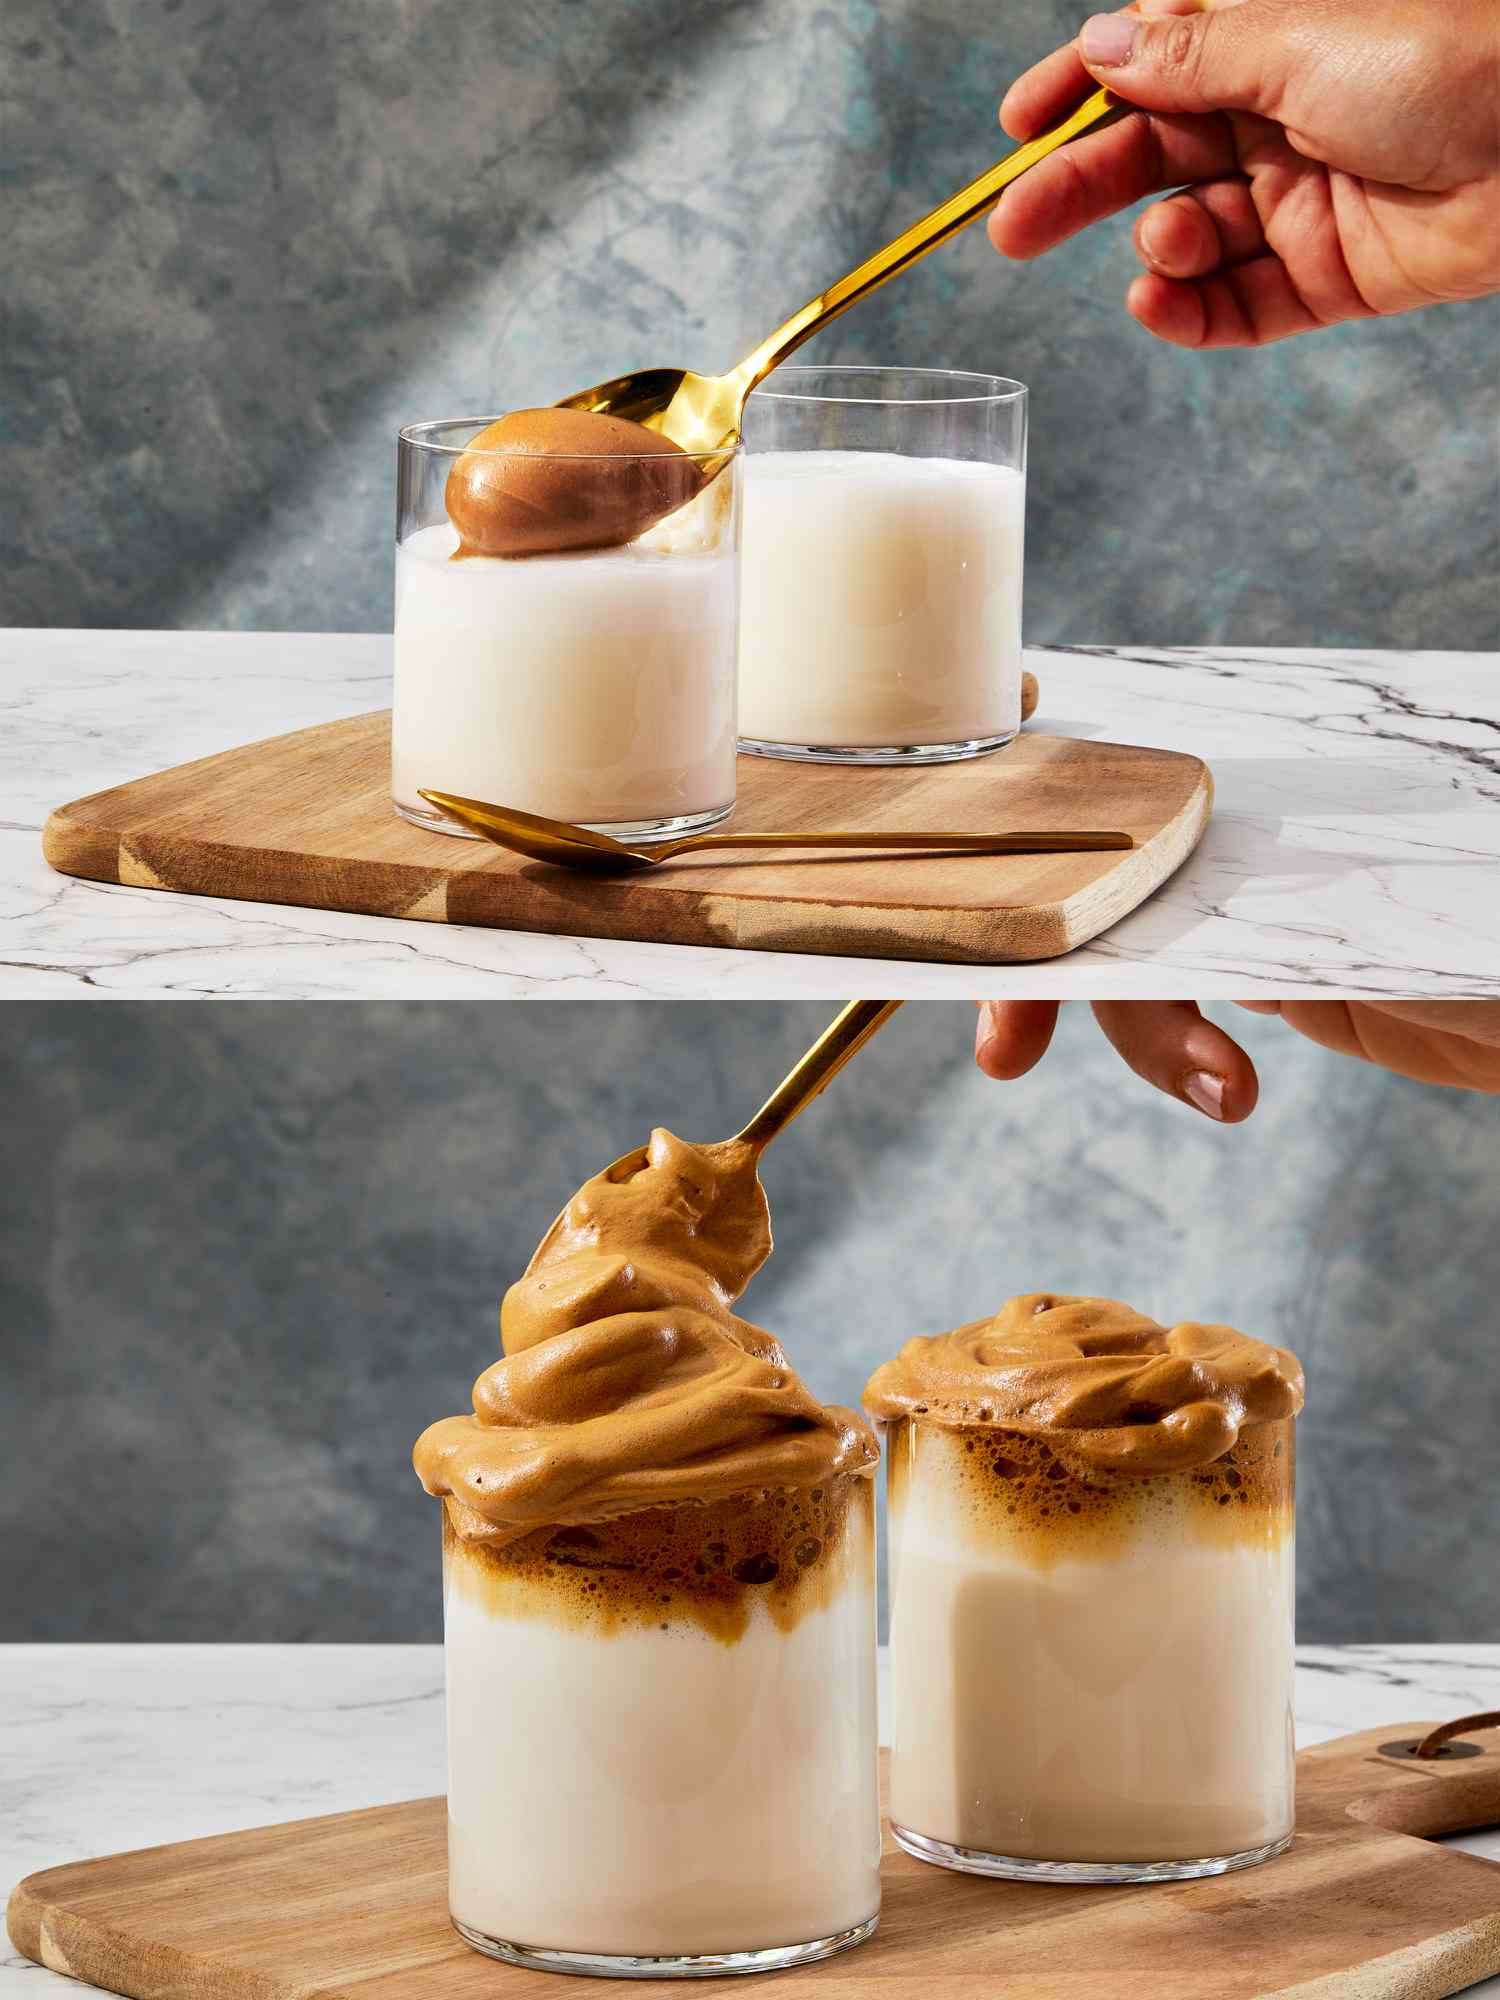 Two image collage of topping milk with coffee foam